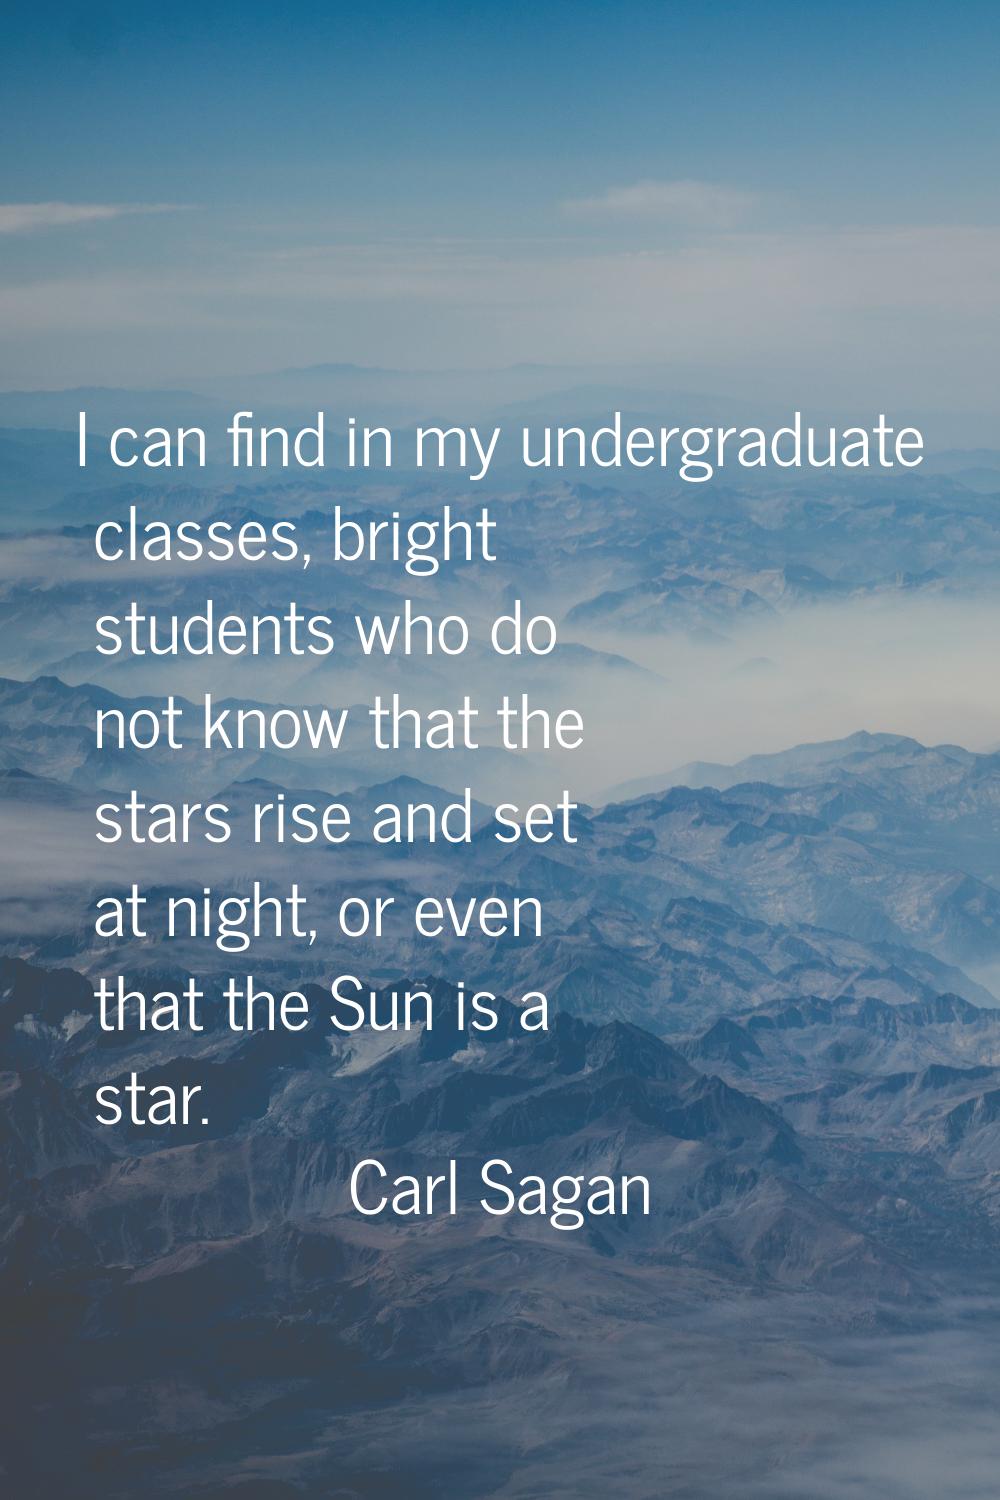 I can find in my undergraduate classes, bright students who do not know that the stars rise and set